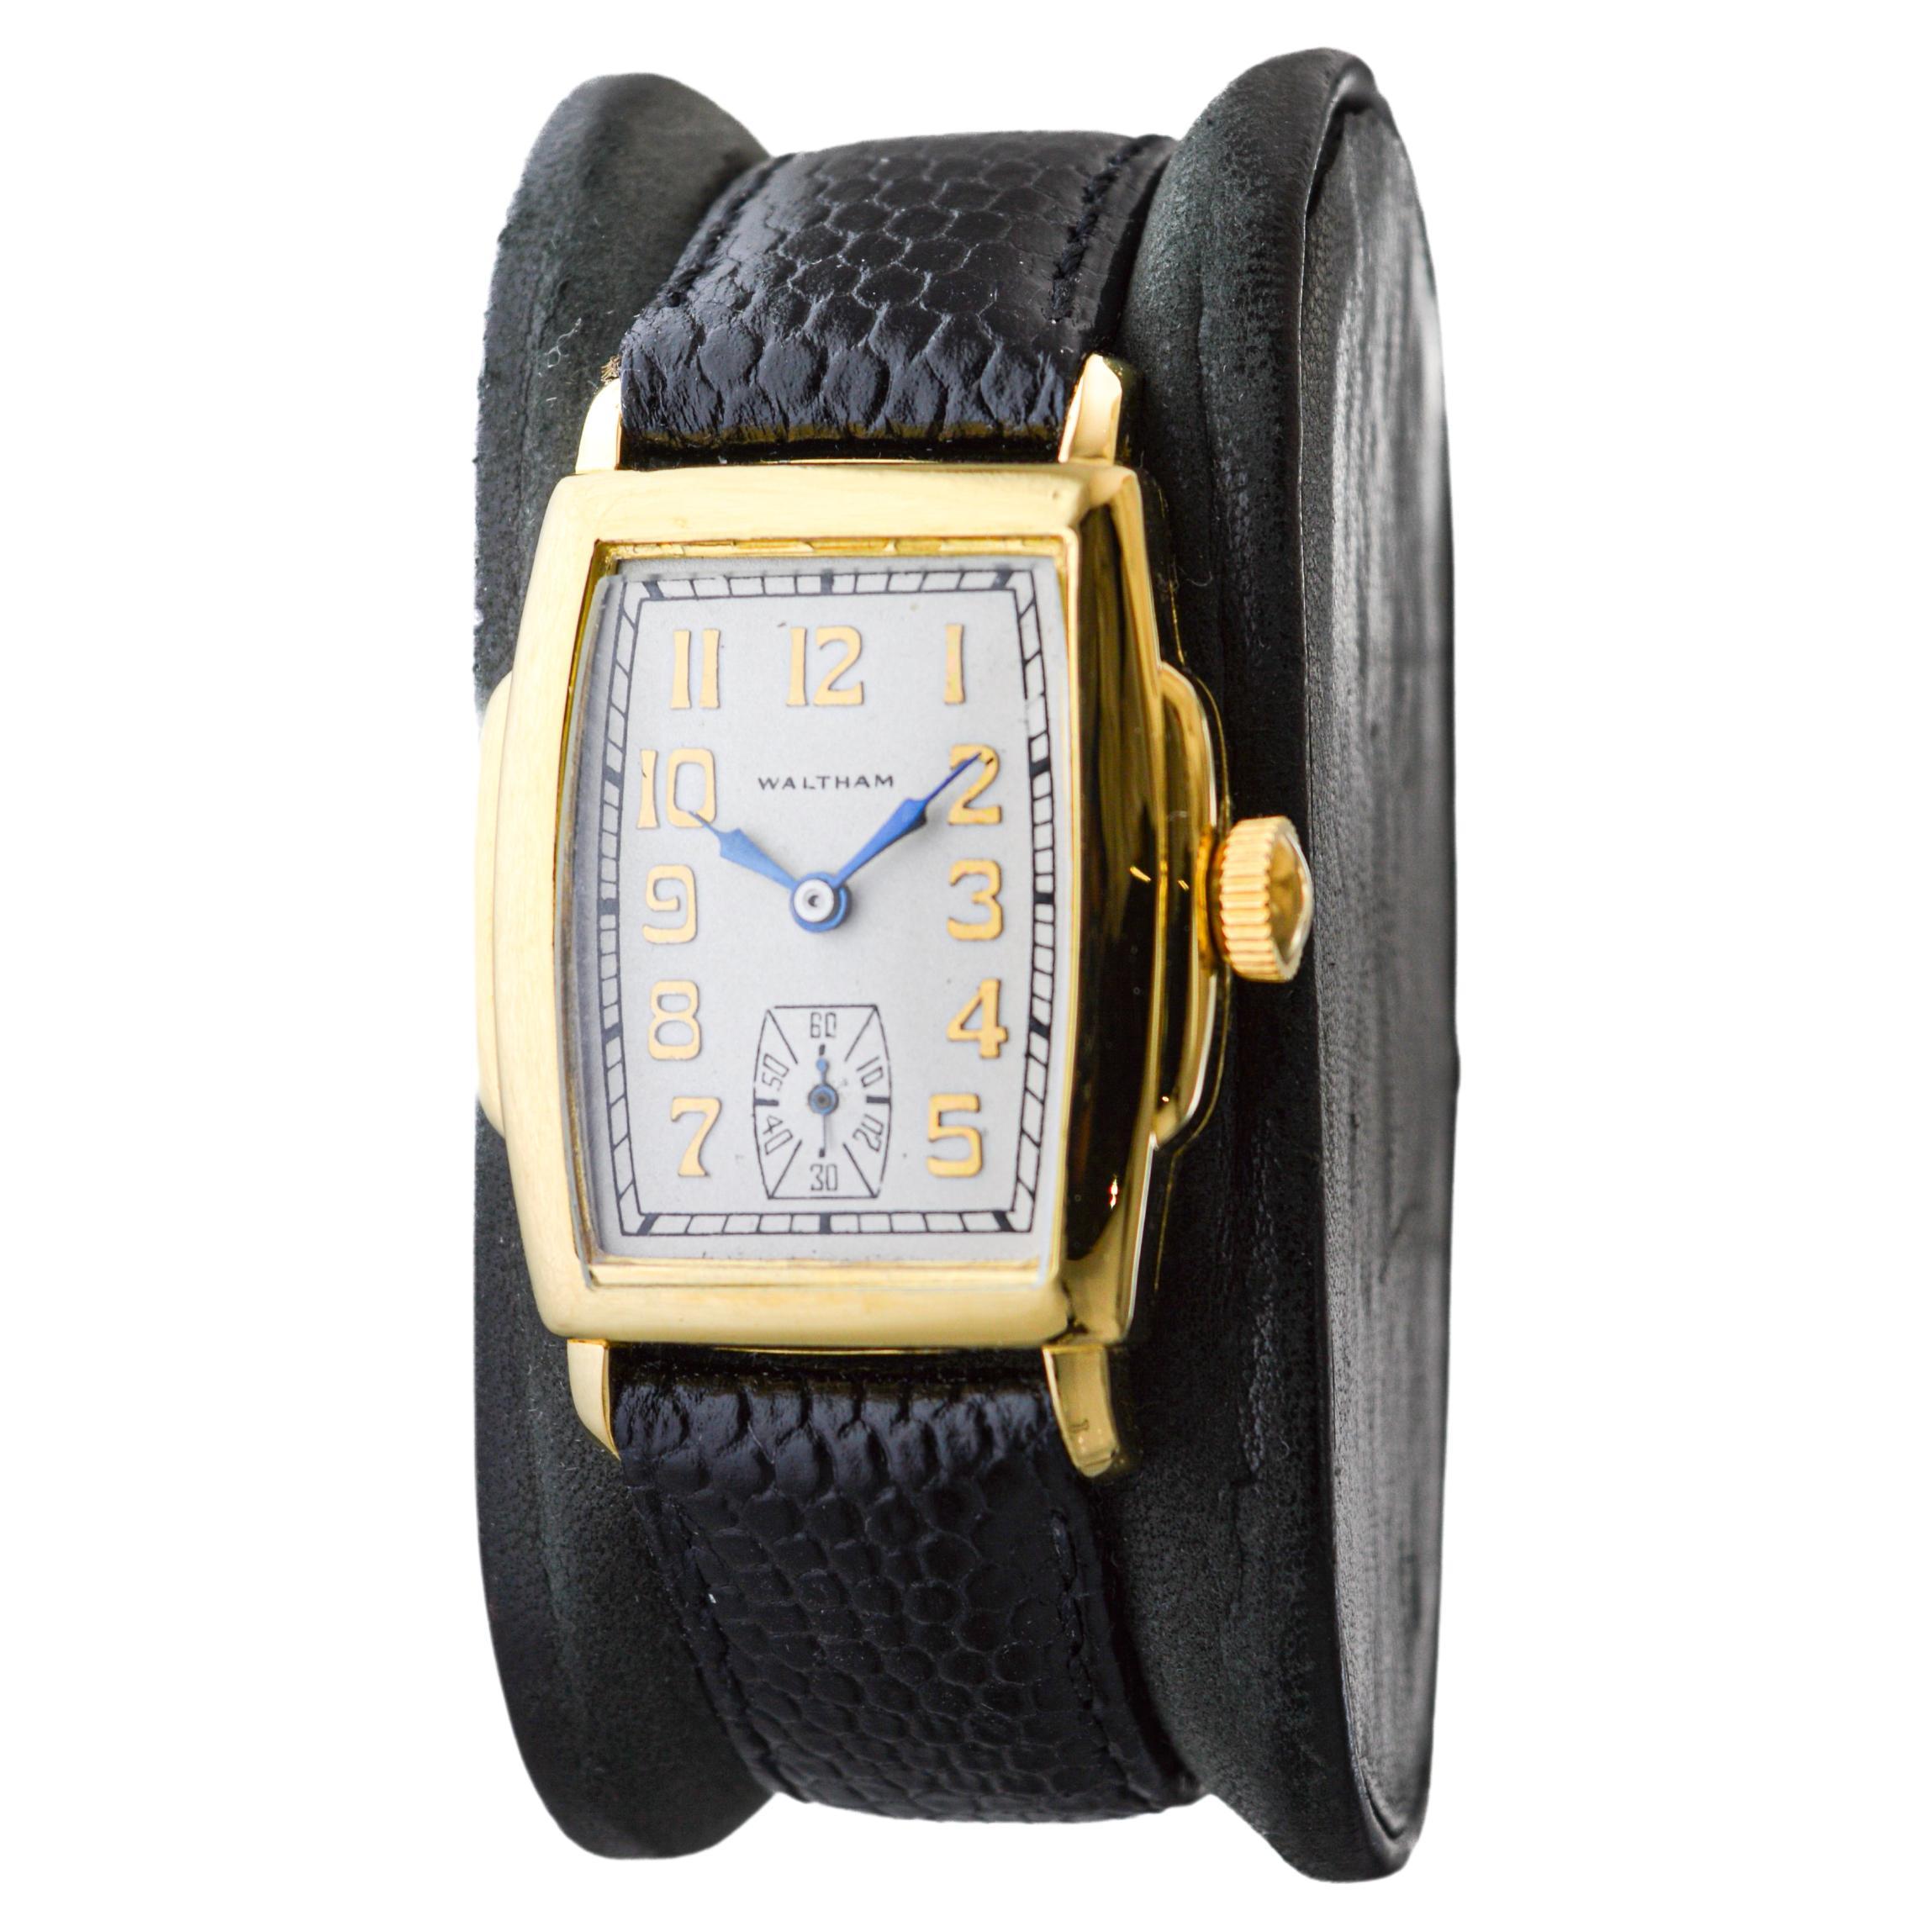 Waltham Gold Filled Art Deco Watch In Excellent Condition For Sale In Long Beach, CA